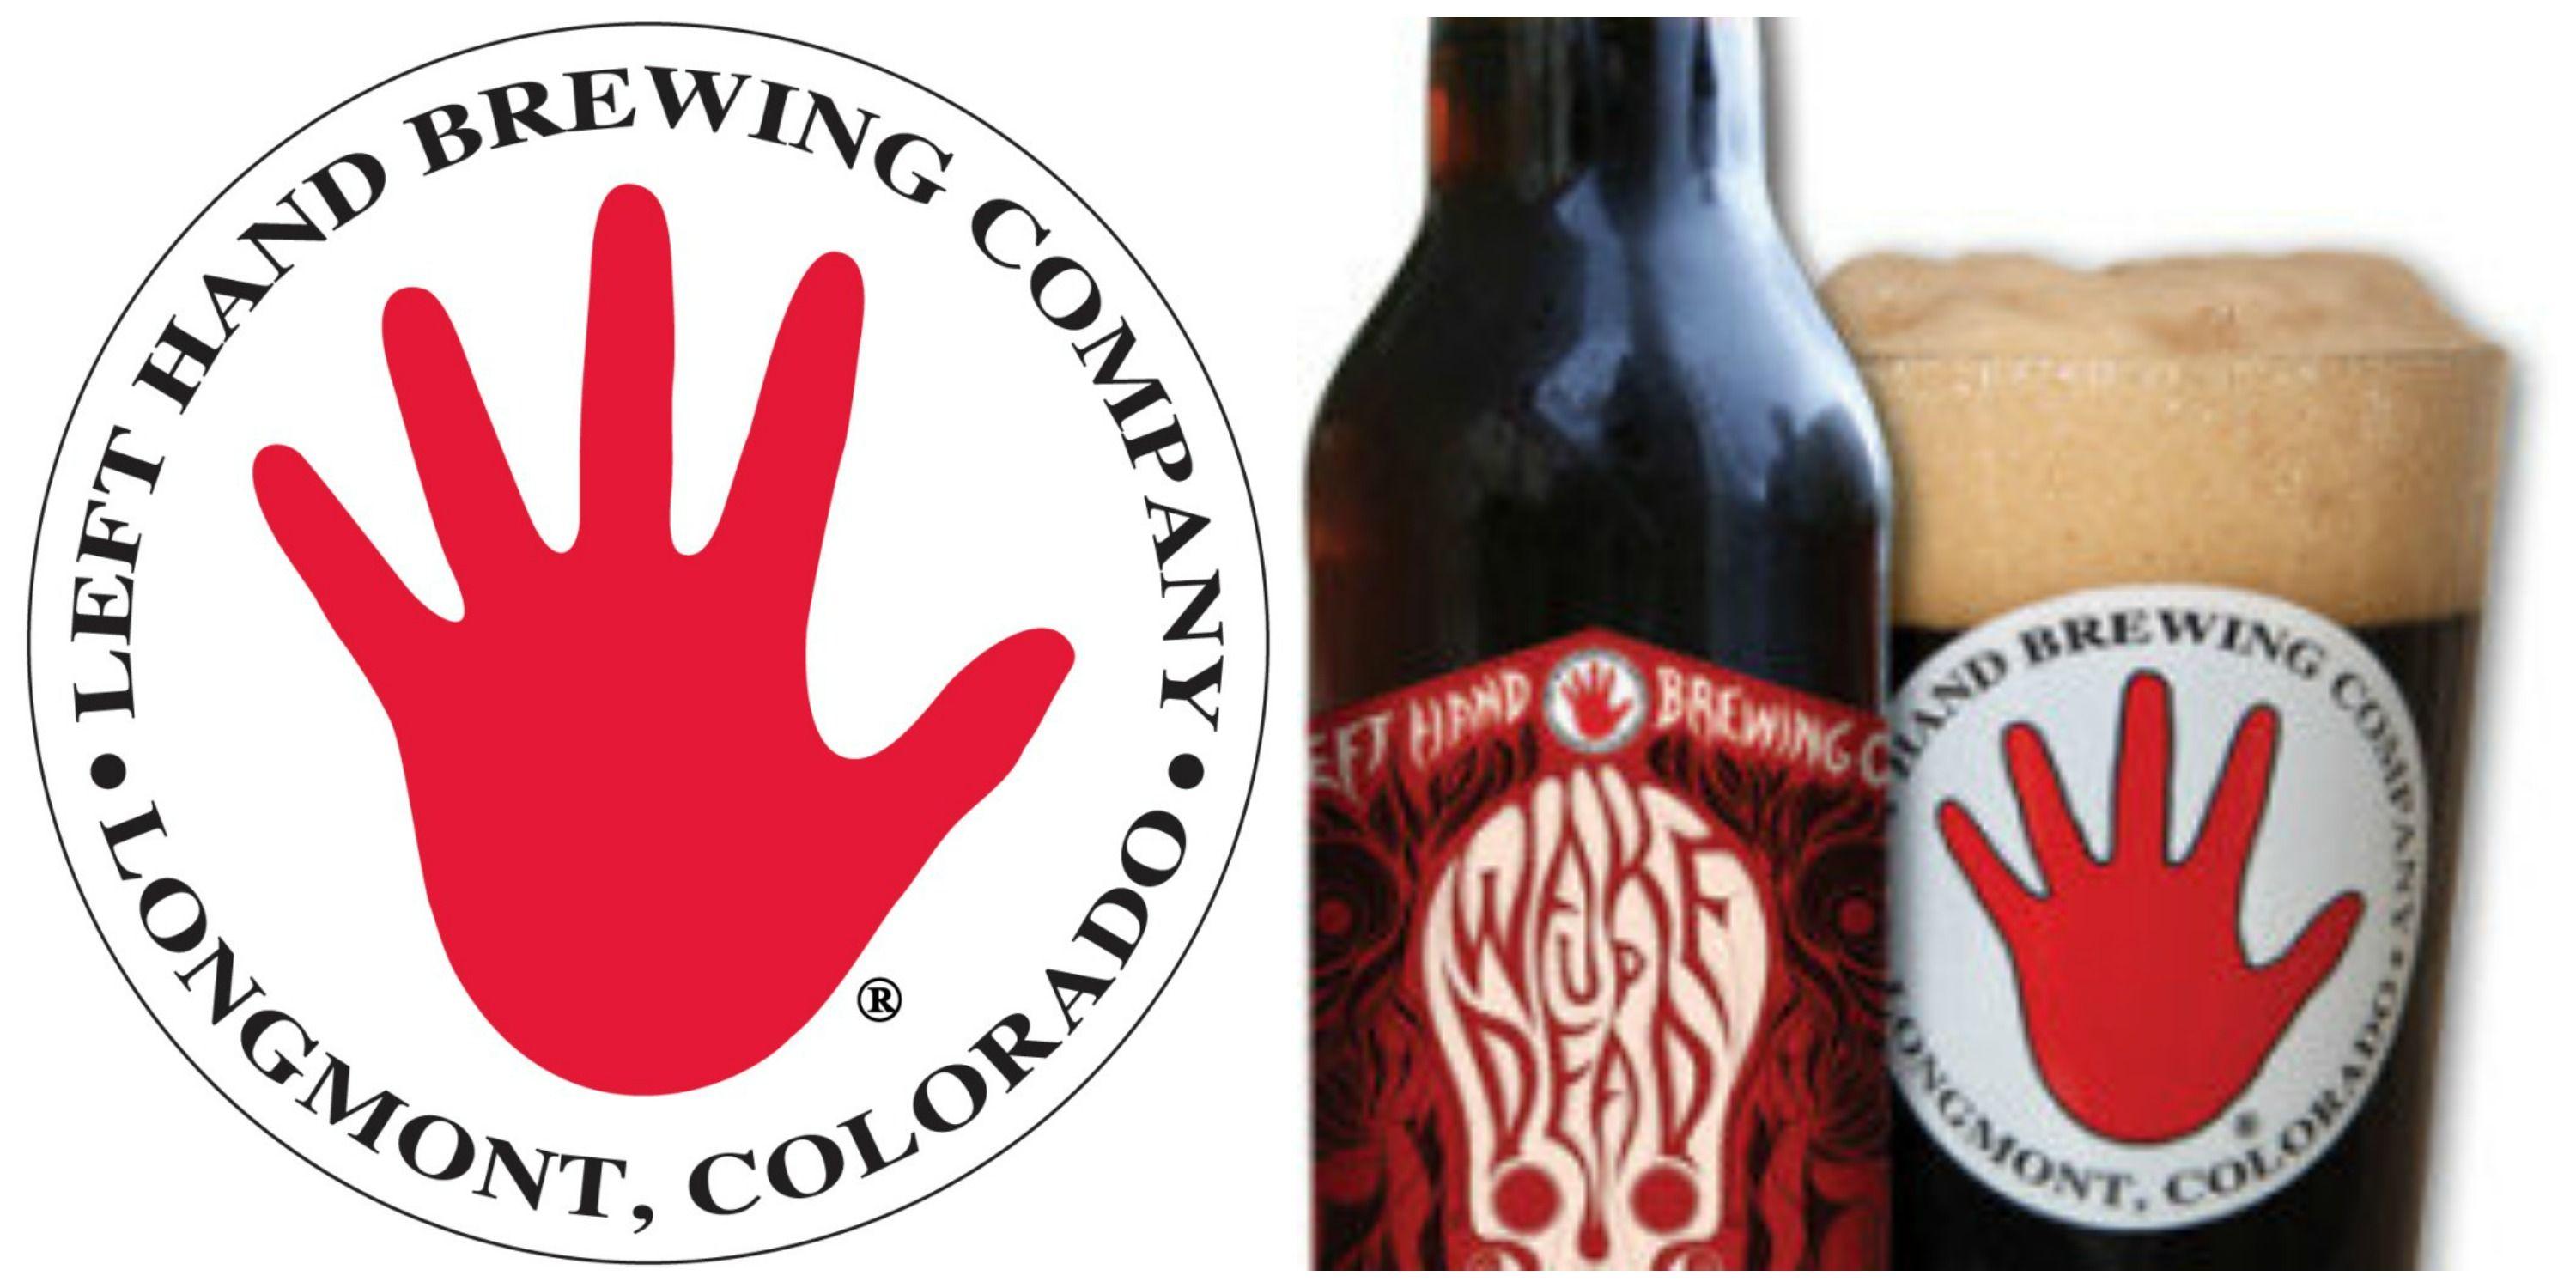 Hand Beer Logo - Wake Up Dead Bottle Service. Thursday, May 8th at 7pm › Sheffields